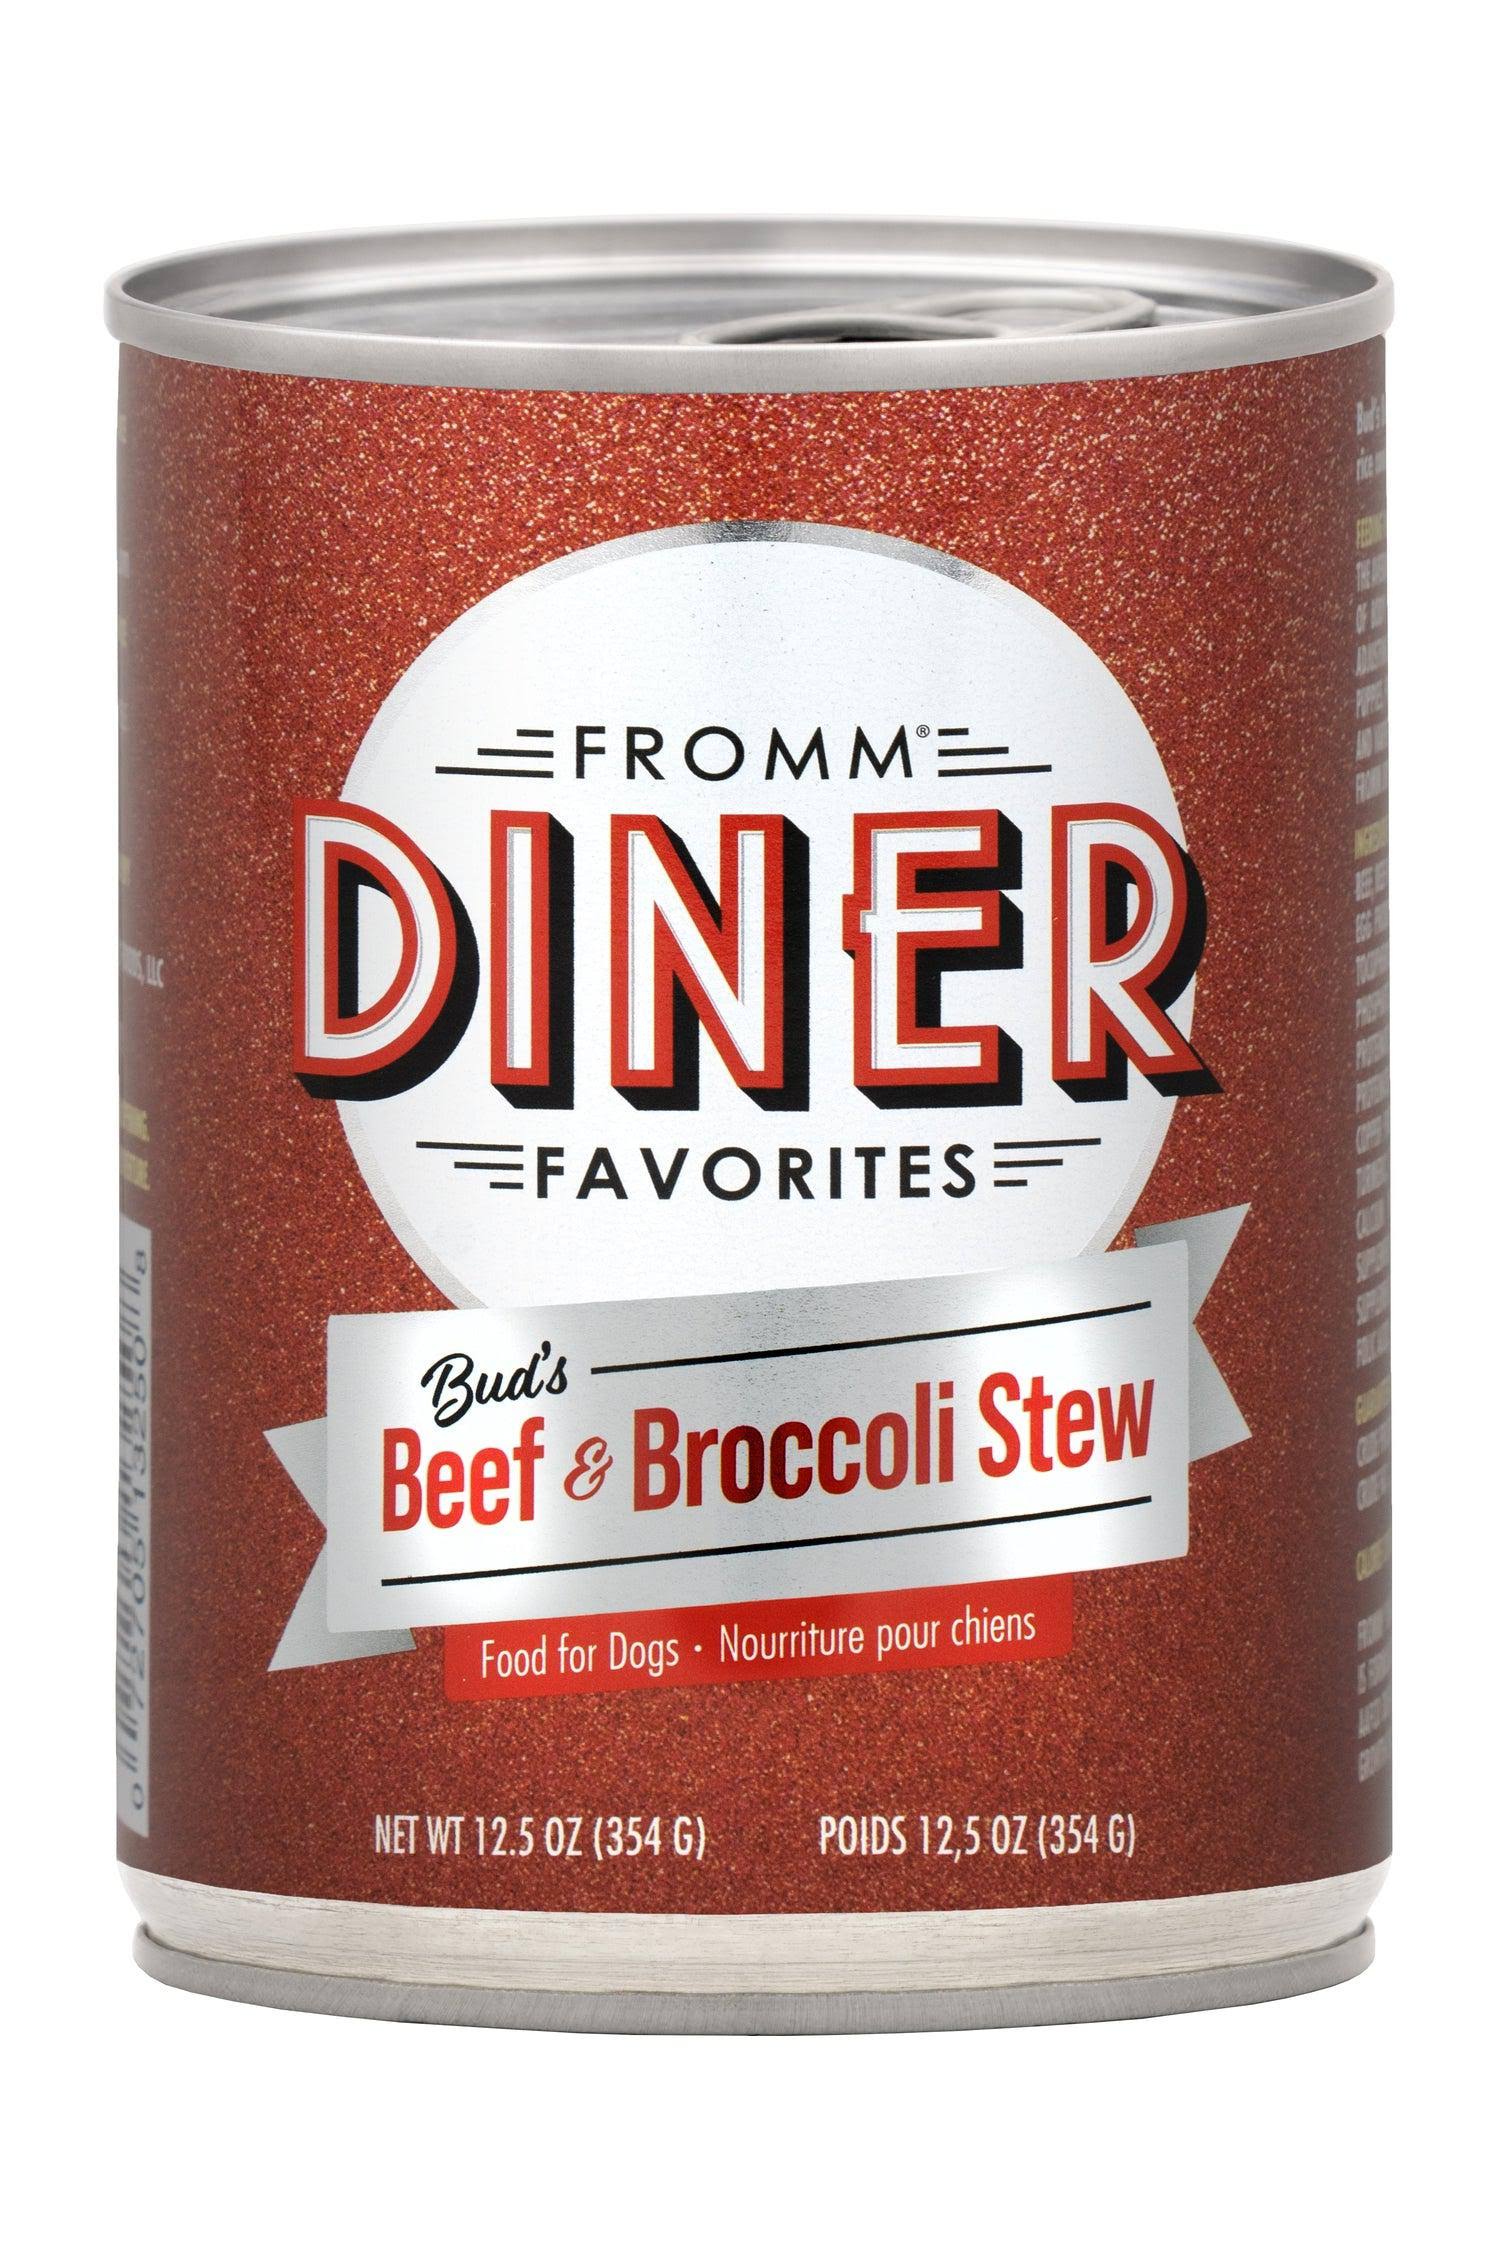 Fromm Diner Bud's Beef & Broccoli Stew Canned Dog Food 12.5oz